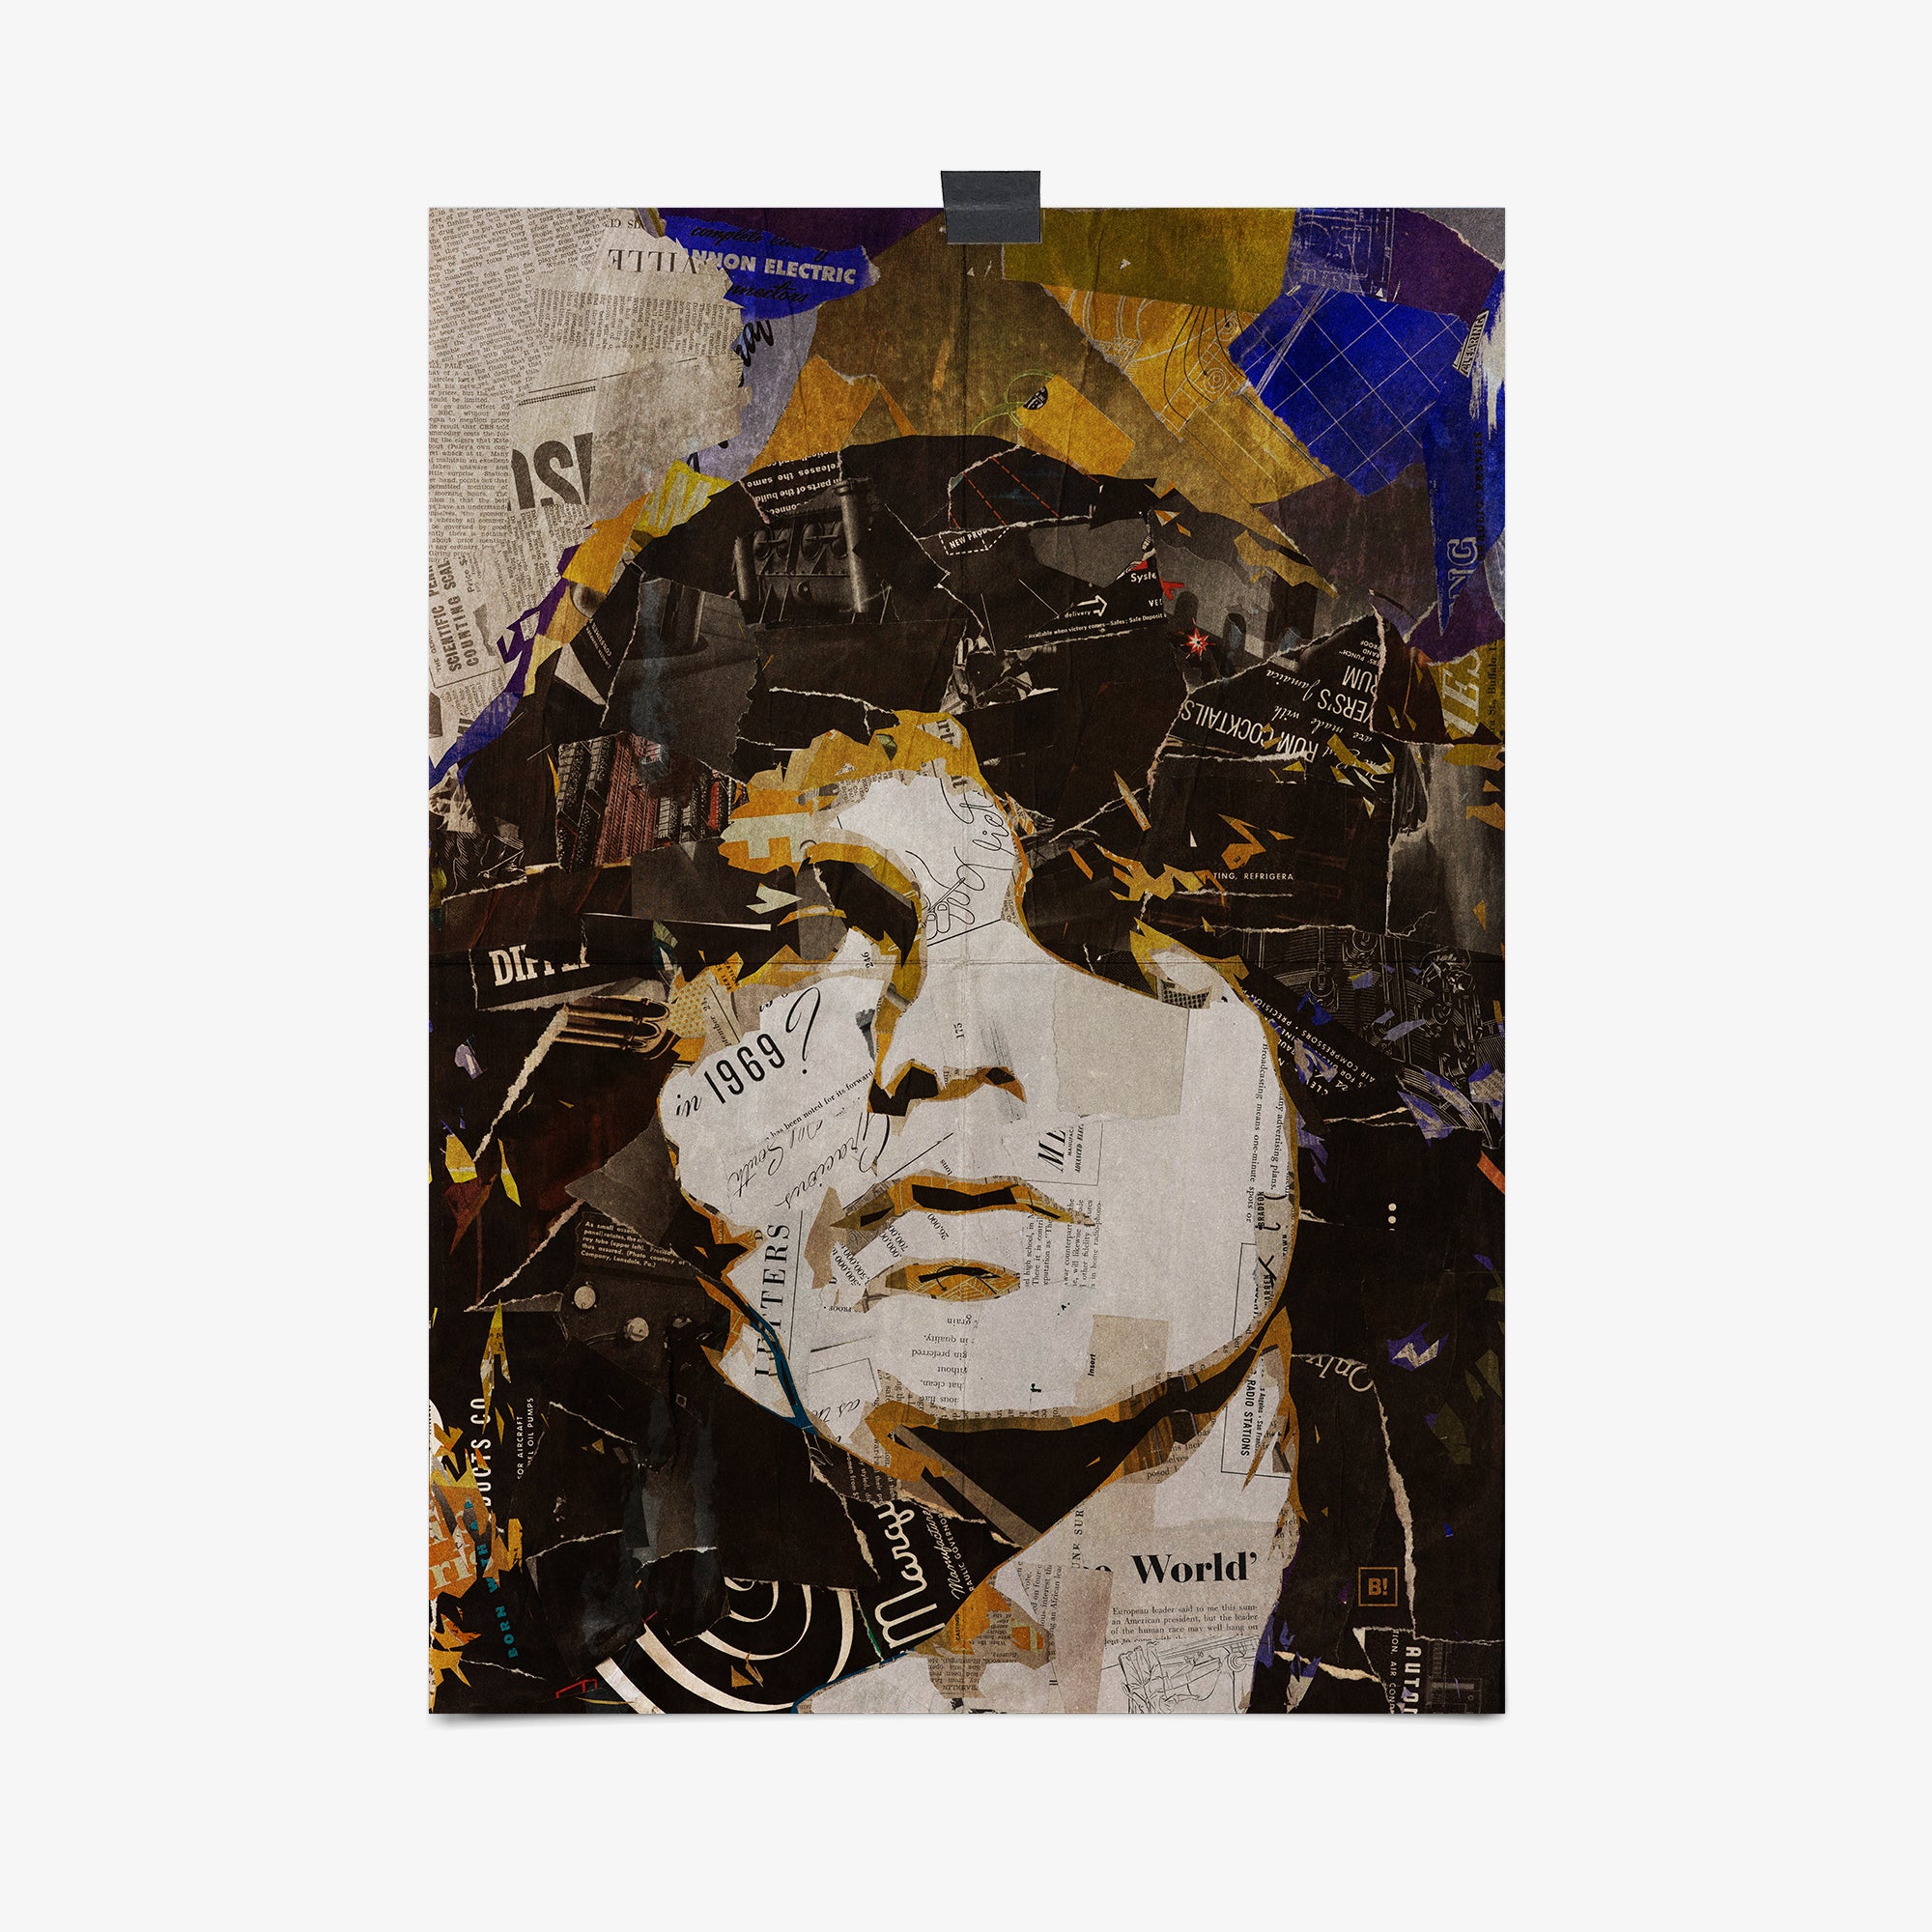 Be inspired by our iconic collage portrait art print of Jim Morrison. This artwork was printed using the giclée process on archival acid-free paper, capturing its timeless beauty in every detail.